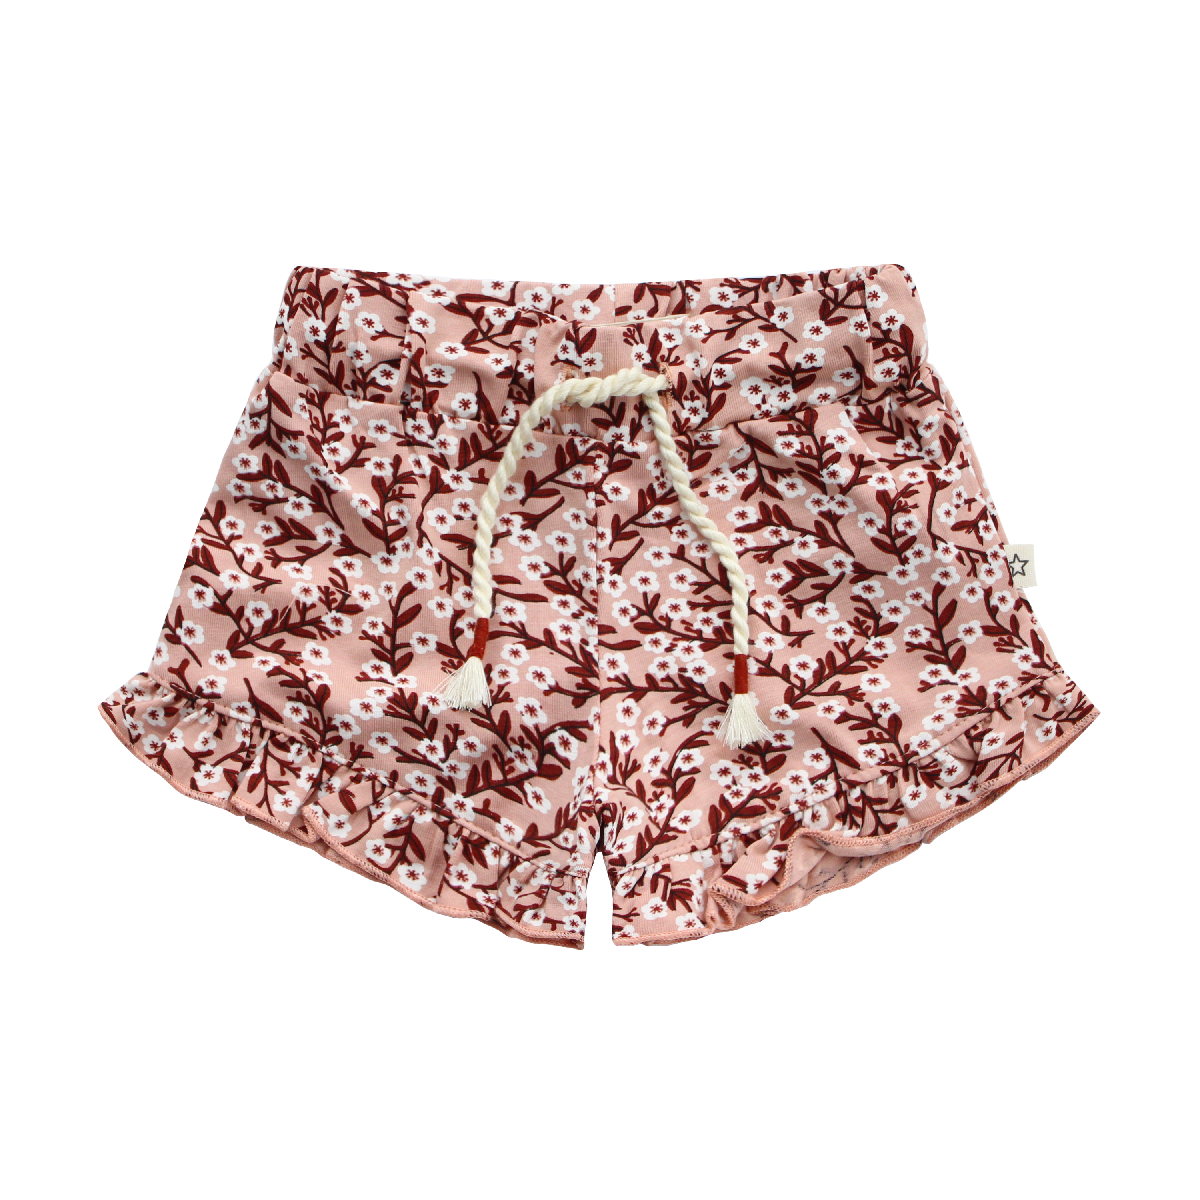 Your Wishes Floral - Ruffle Shorts